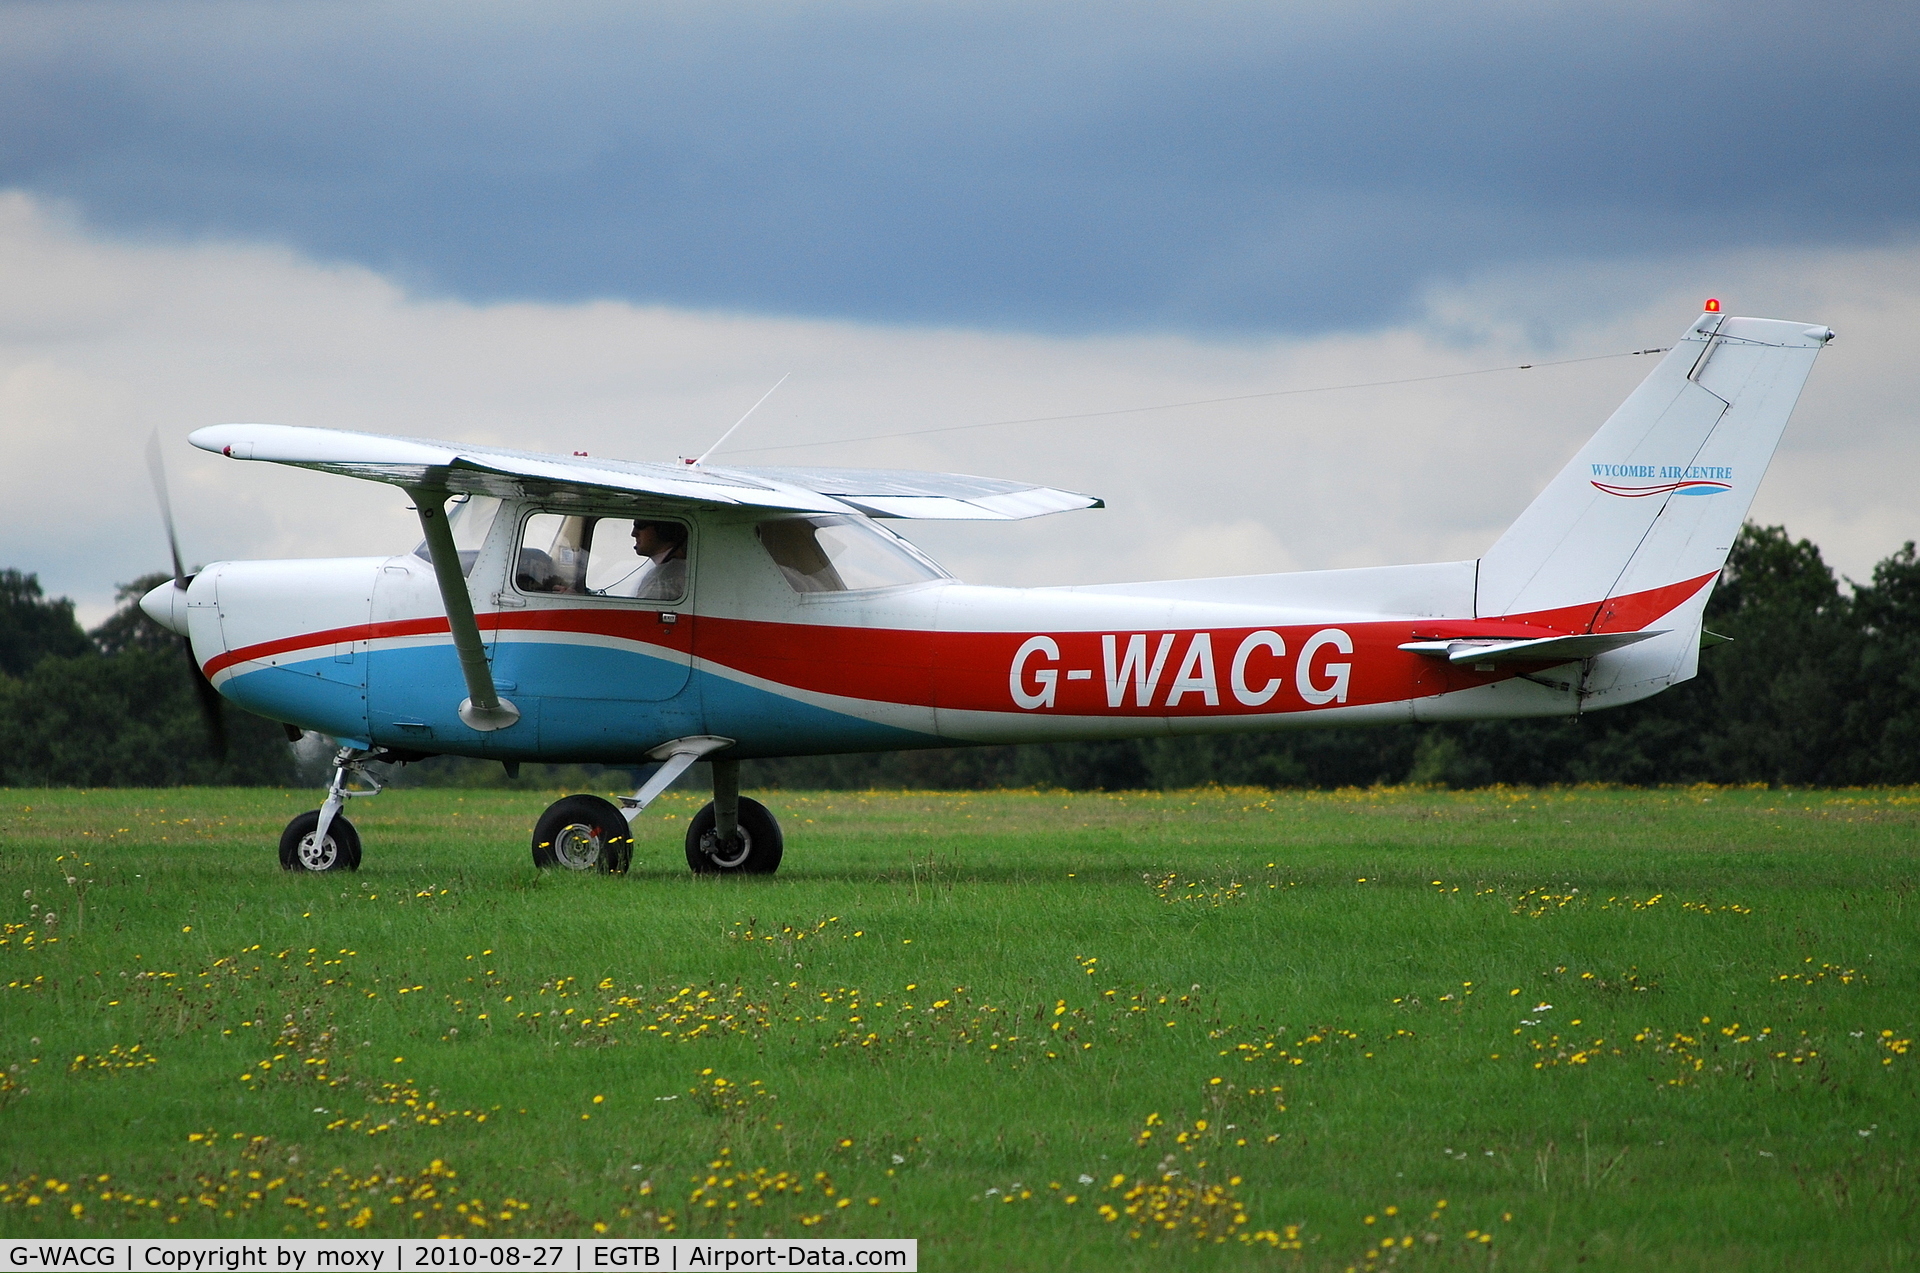 G-WACG, 1982 Cessna 152 C/N 152-85536, Cessna 152 Ex ZS-KXY at Wycombe Air Park. Sadly on the 17th November 2017 this aicraft collided with Gimbal G-JAMM near Aylesbury resulting in four fatalities.